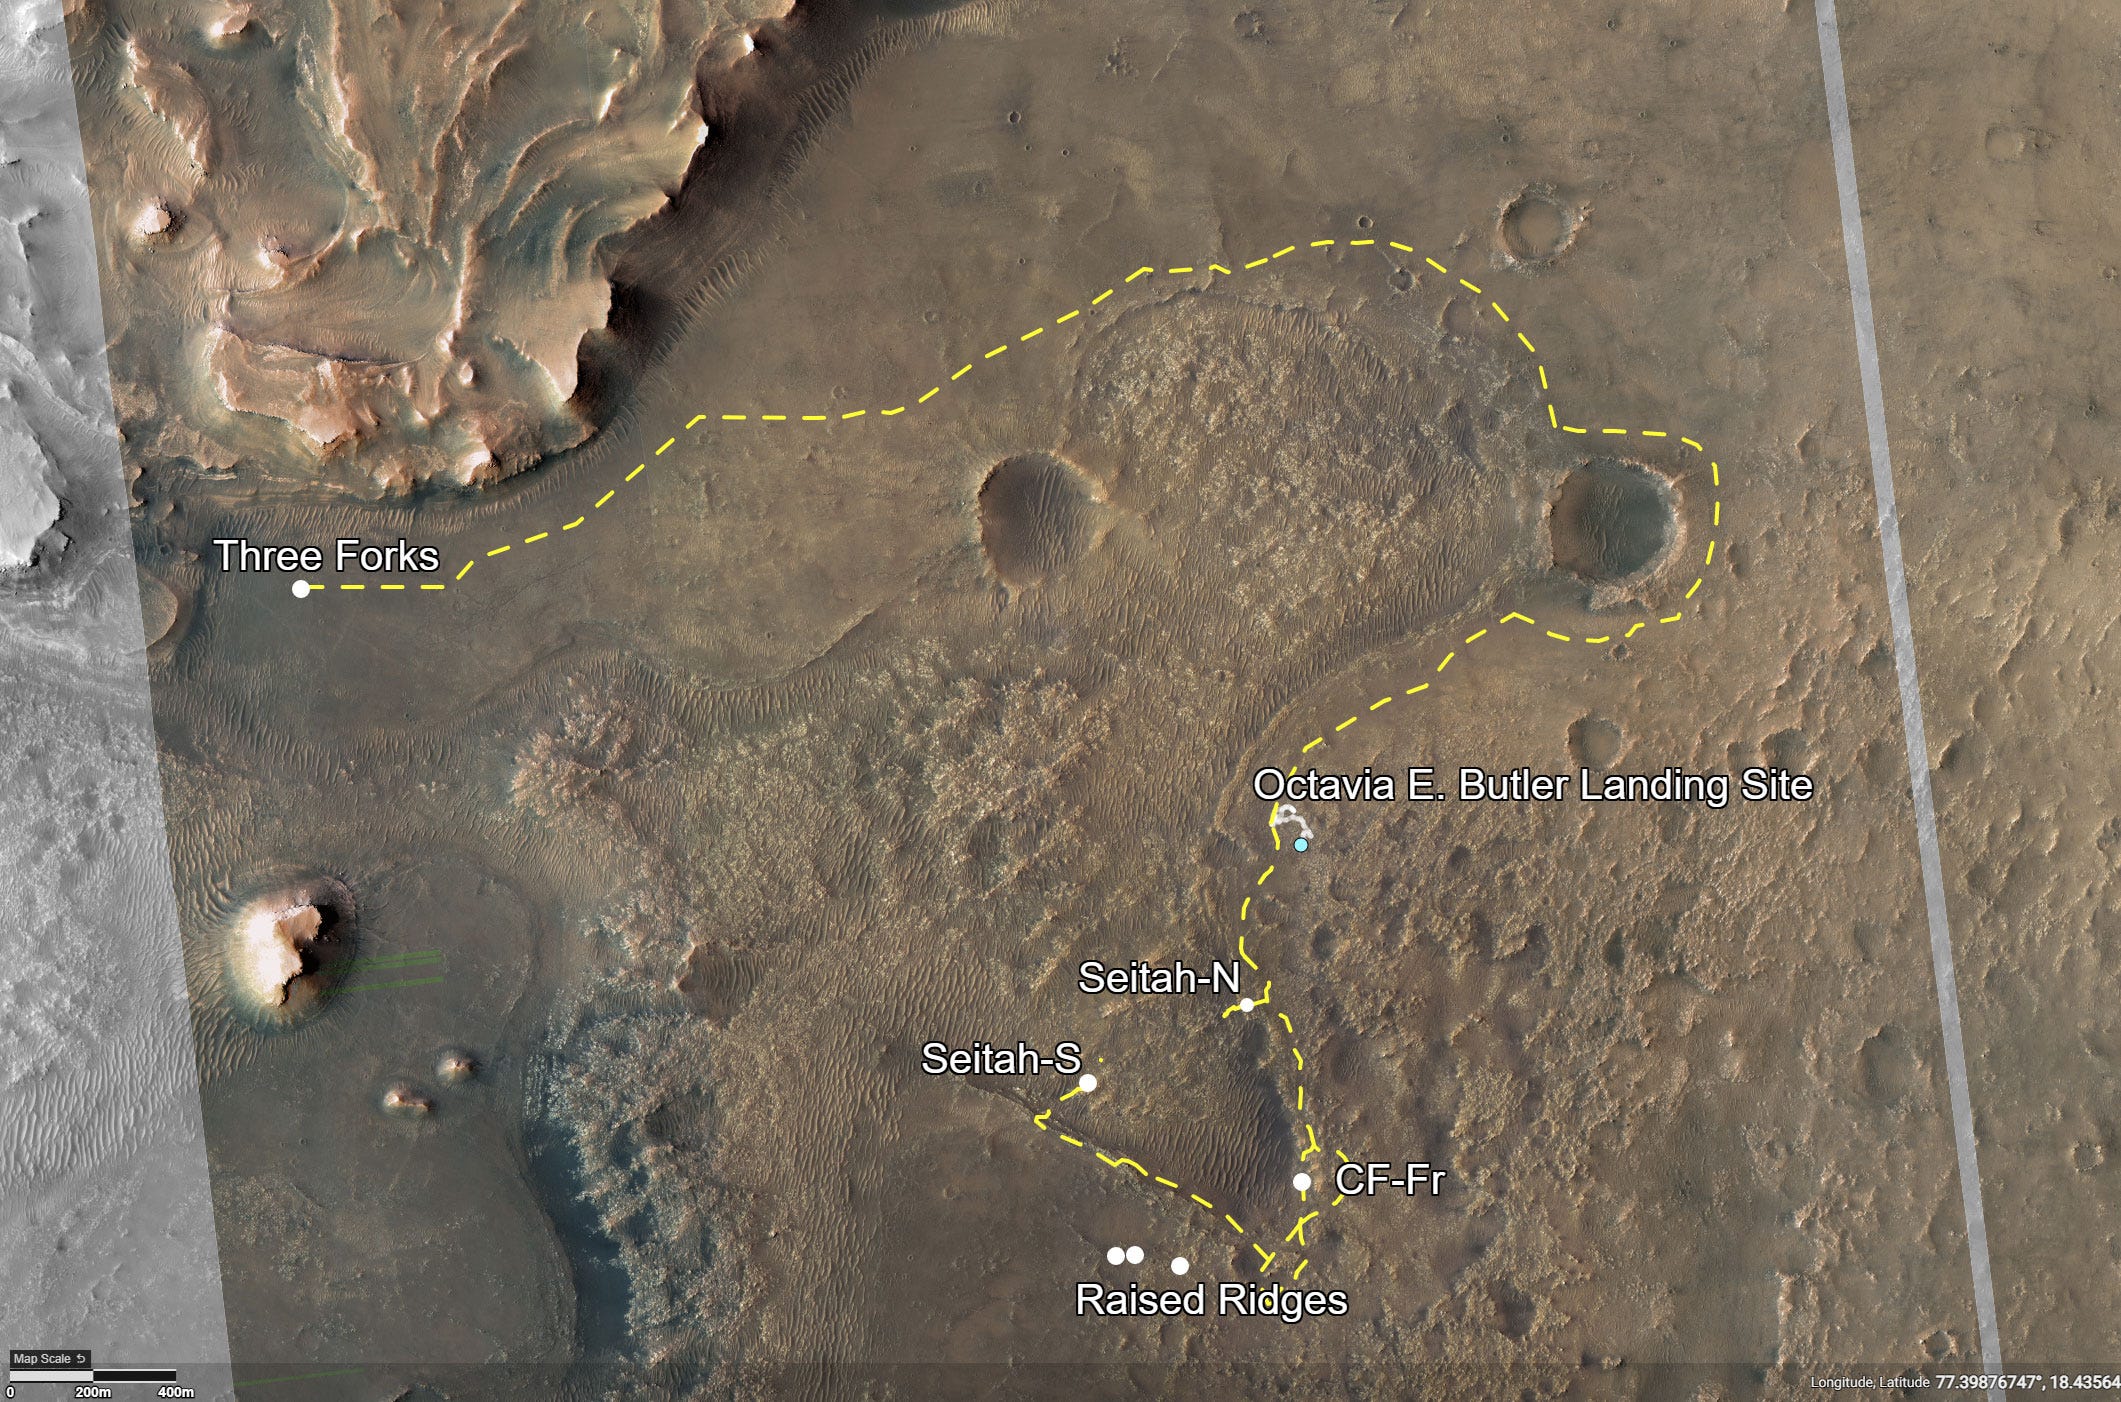 annotated image of Mars' Jezero Crater depicts the route NASA’s Perseverance rover will take during its first science campaign